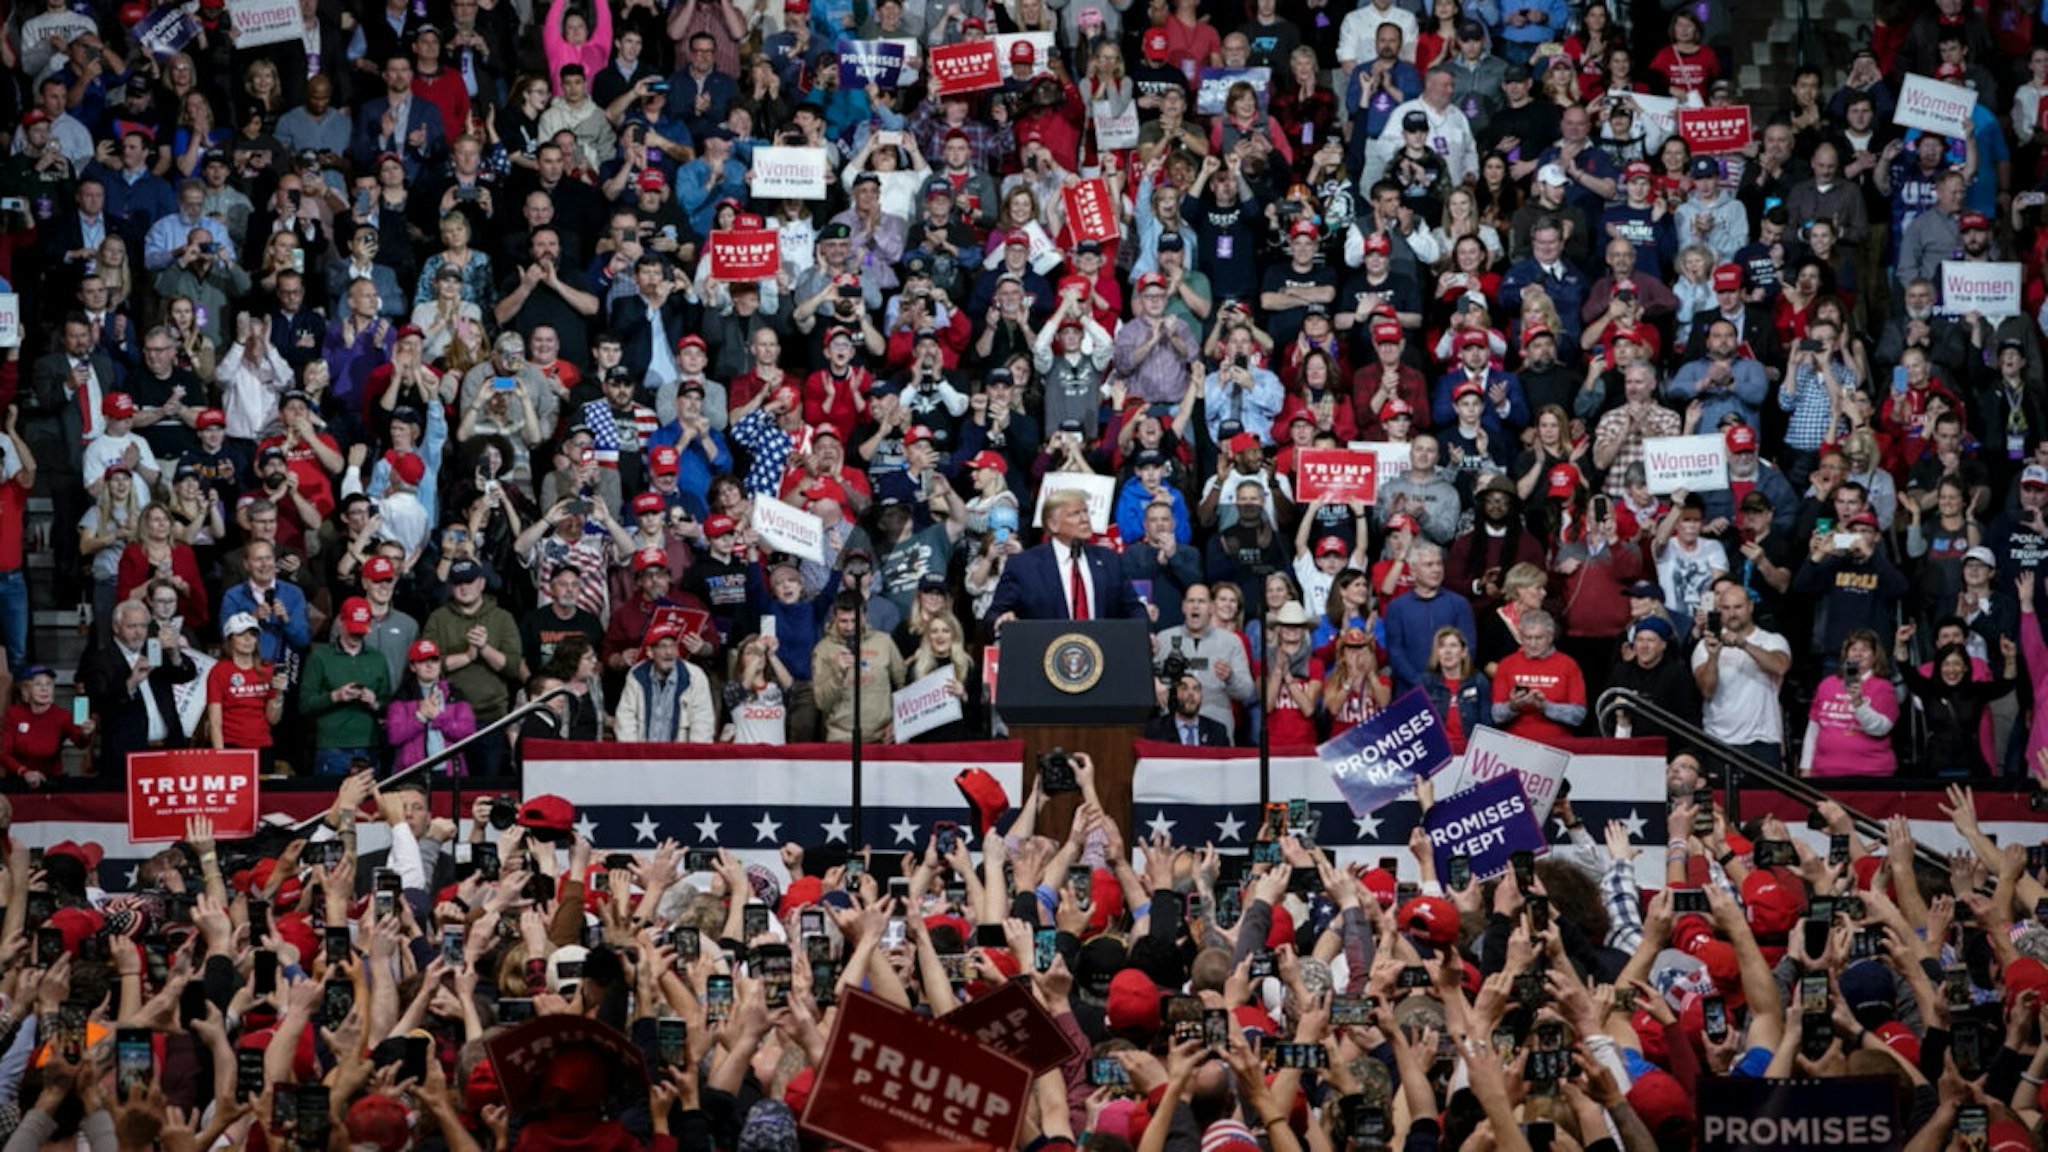 Supporters cheer as U.S. President Donald Trump arrives for a "Keep America Great" rally at Southern New Hampshire University Arena on February 10, 2020 in Manchester, New Hampshire.